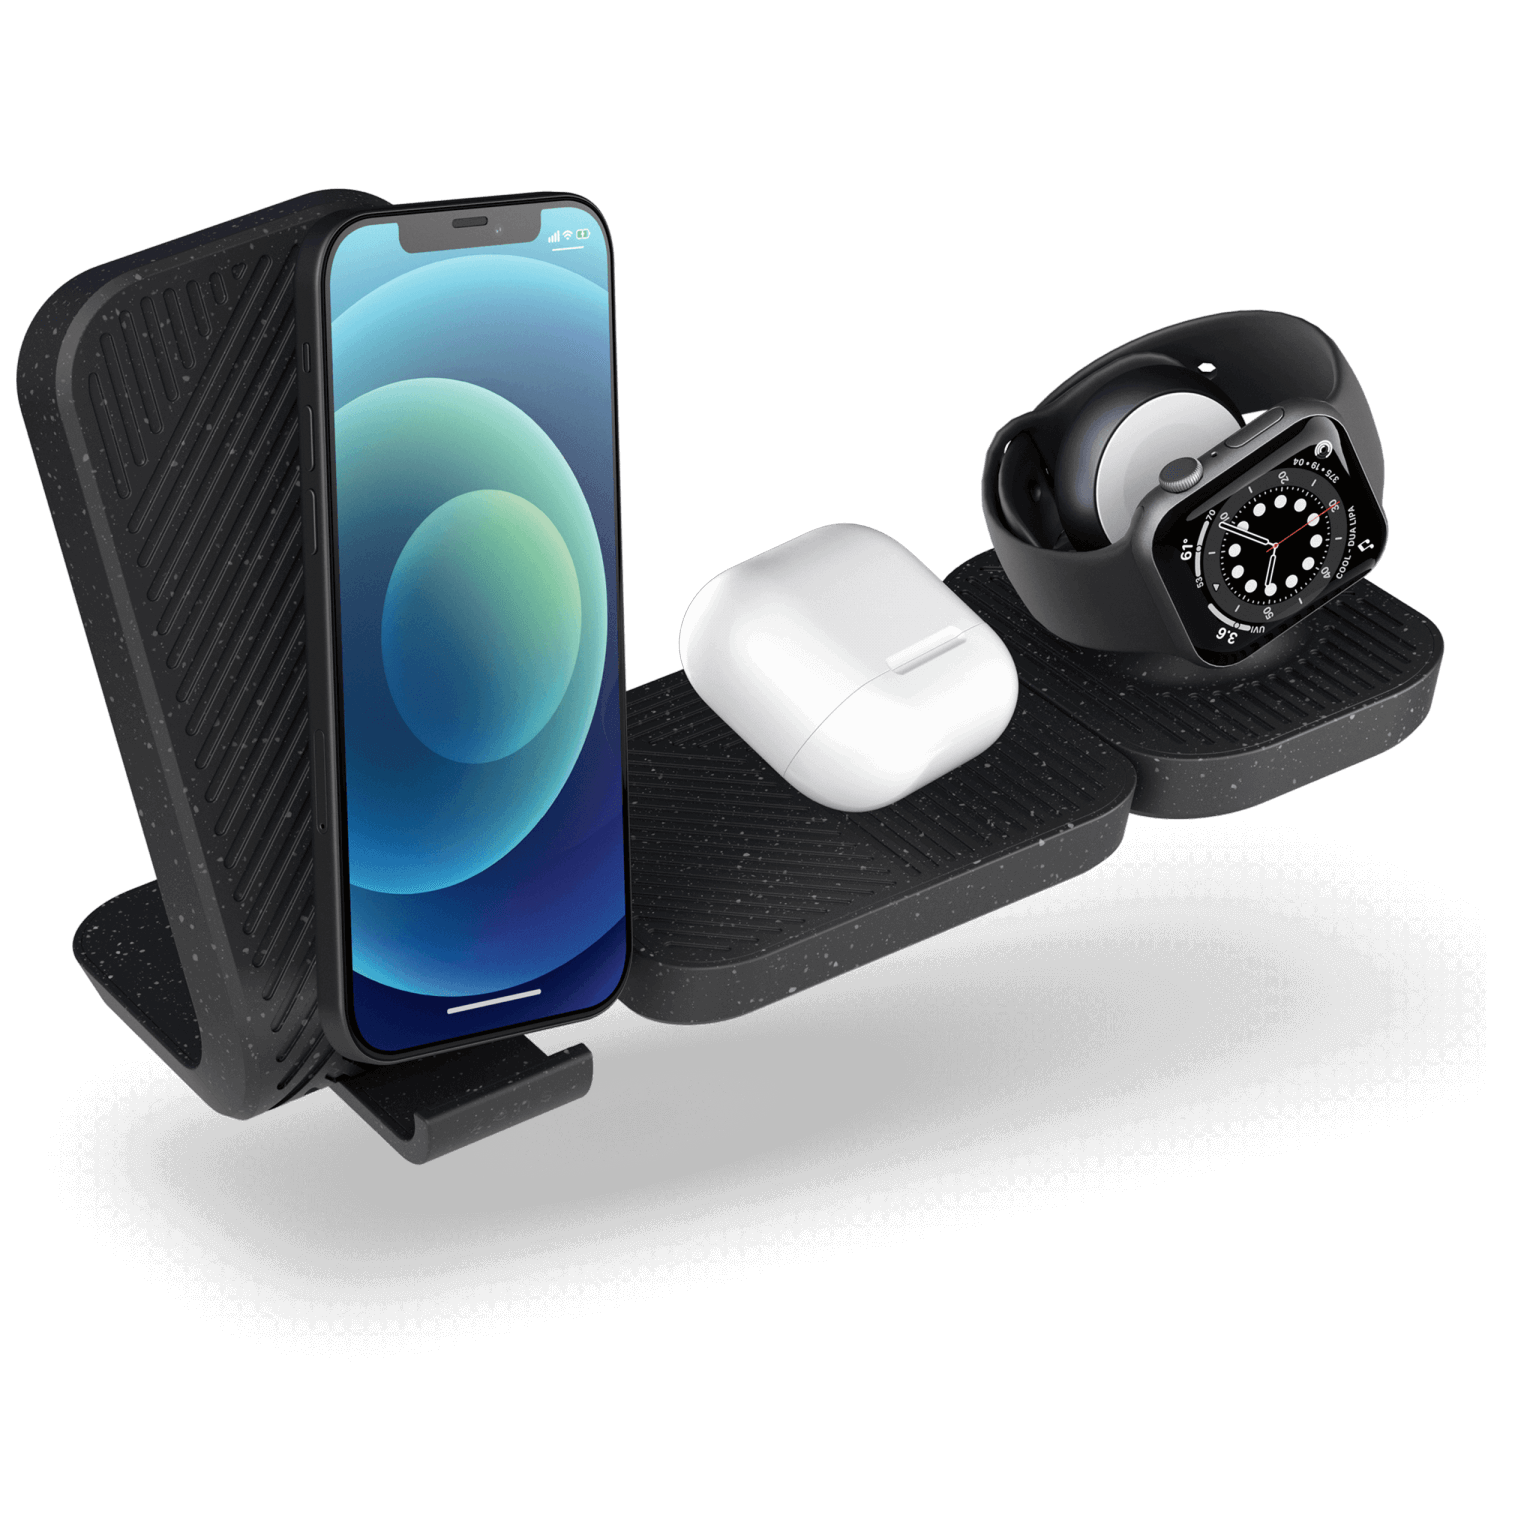 Modular wireless charger with iPhone 12 airpods and apple watch